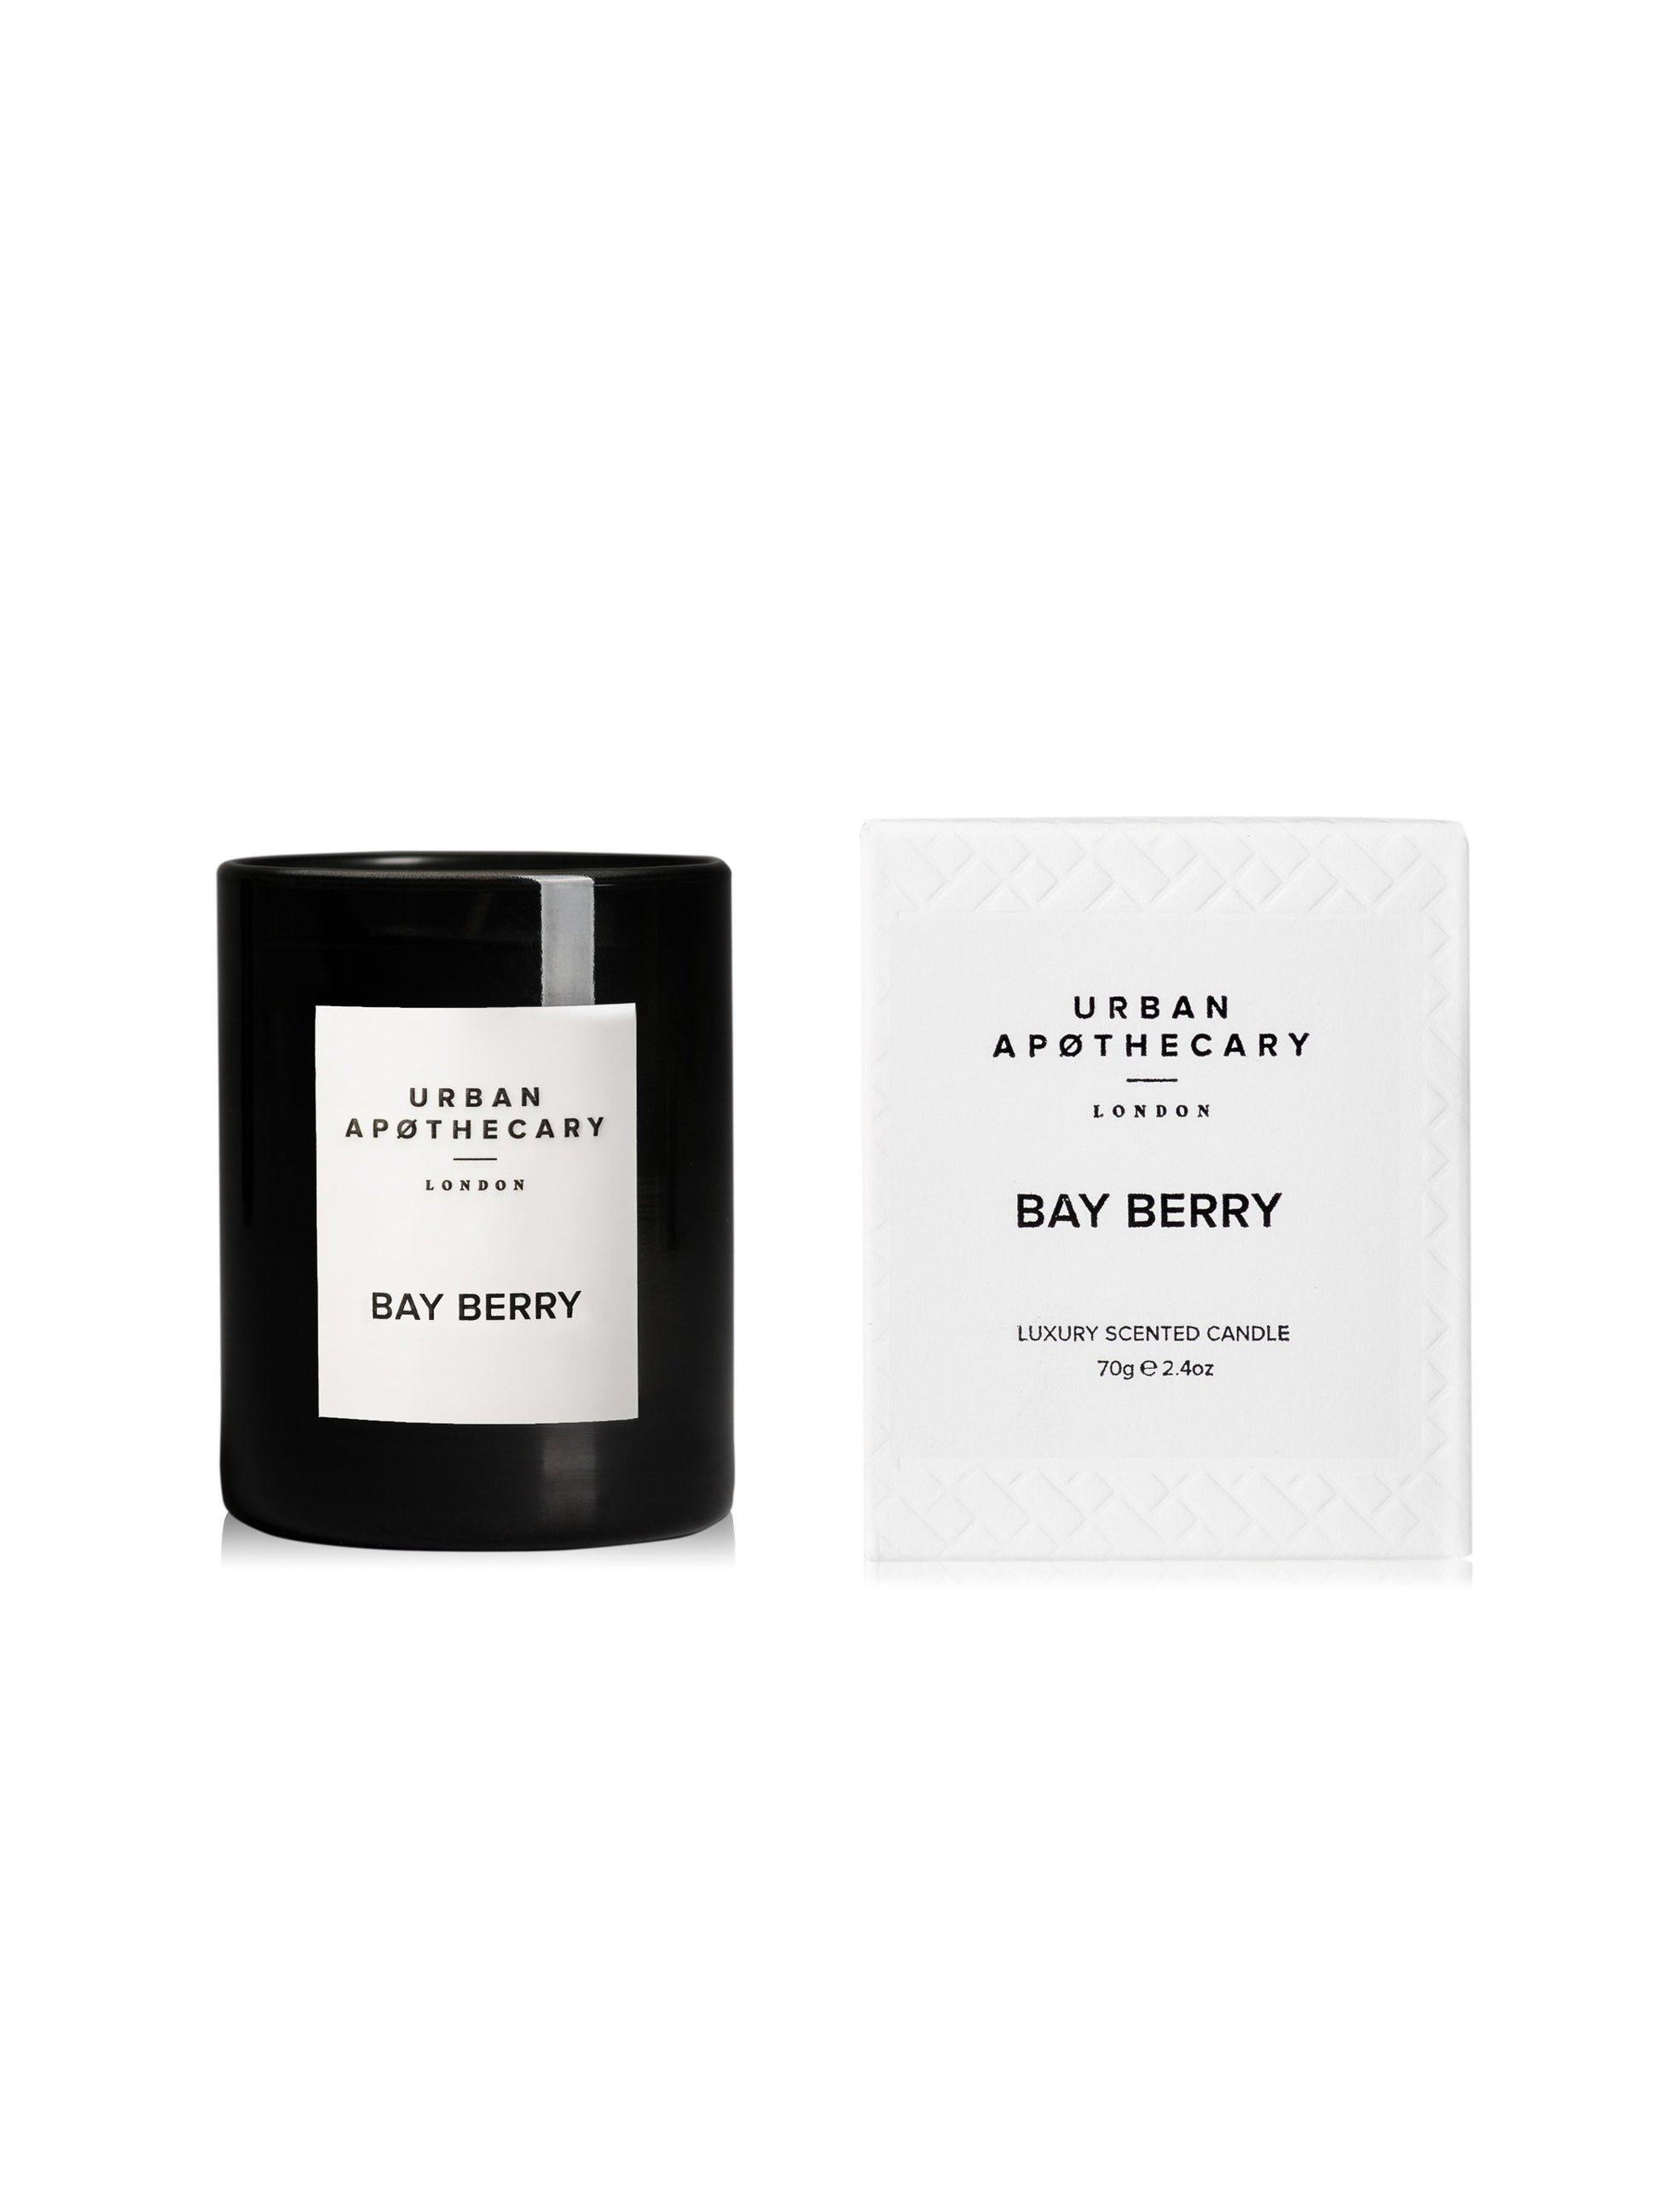 Urban Apothecary London Luxury Bay Berry Mini Scented Candle Weston Table